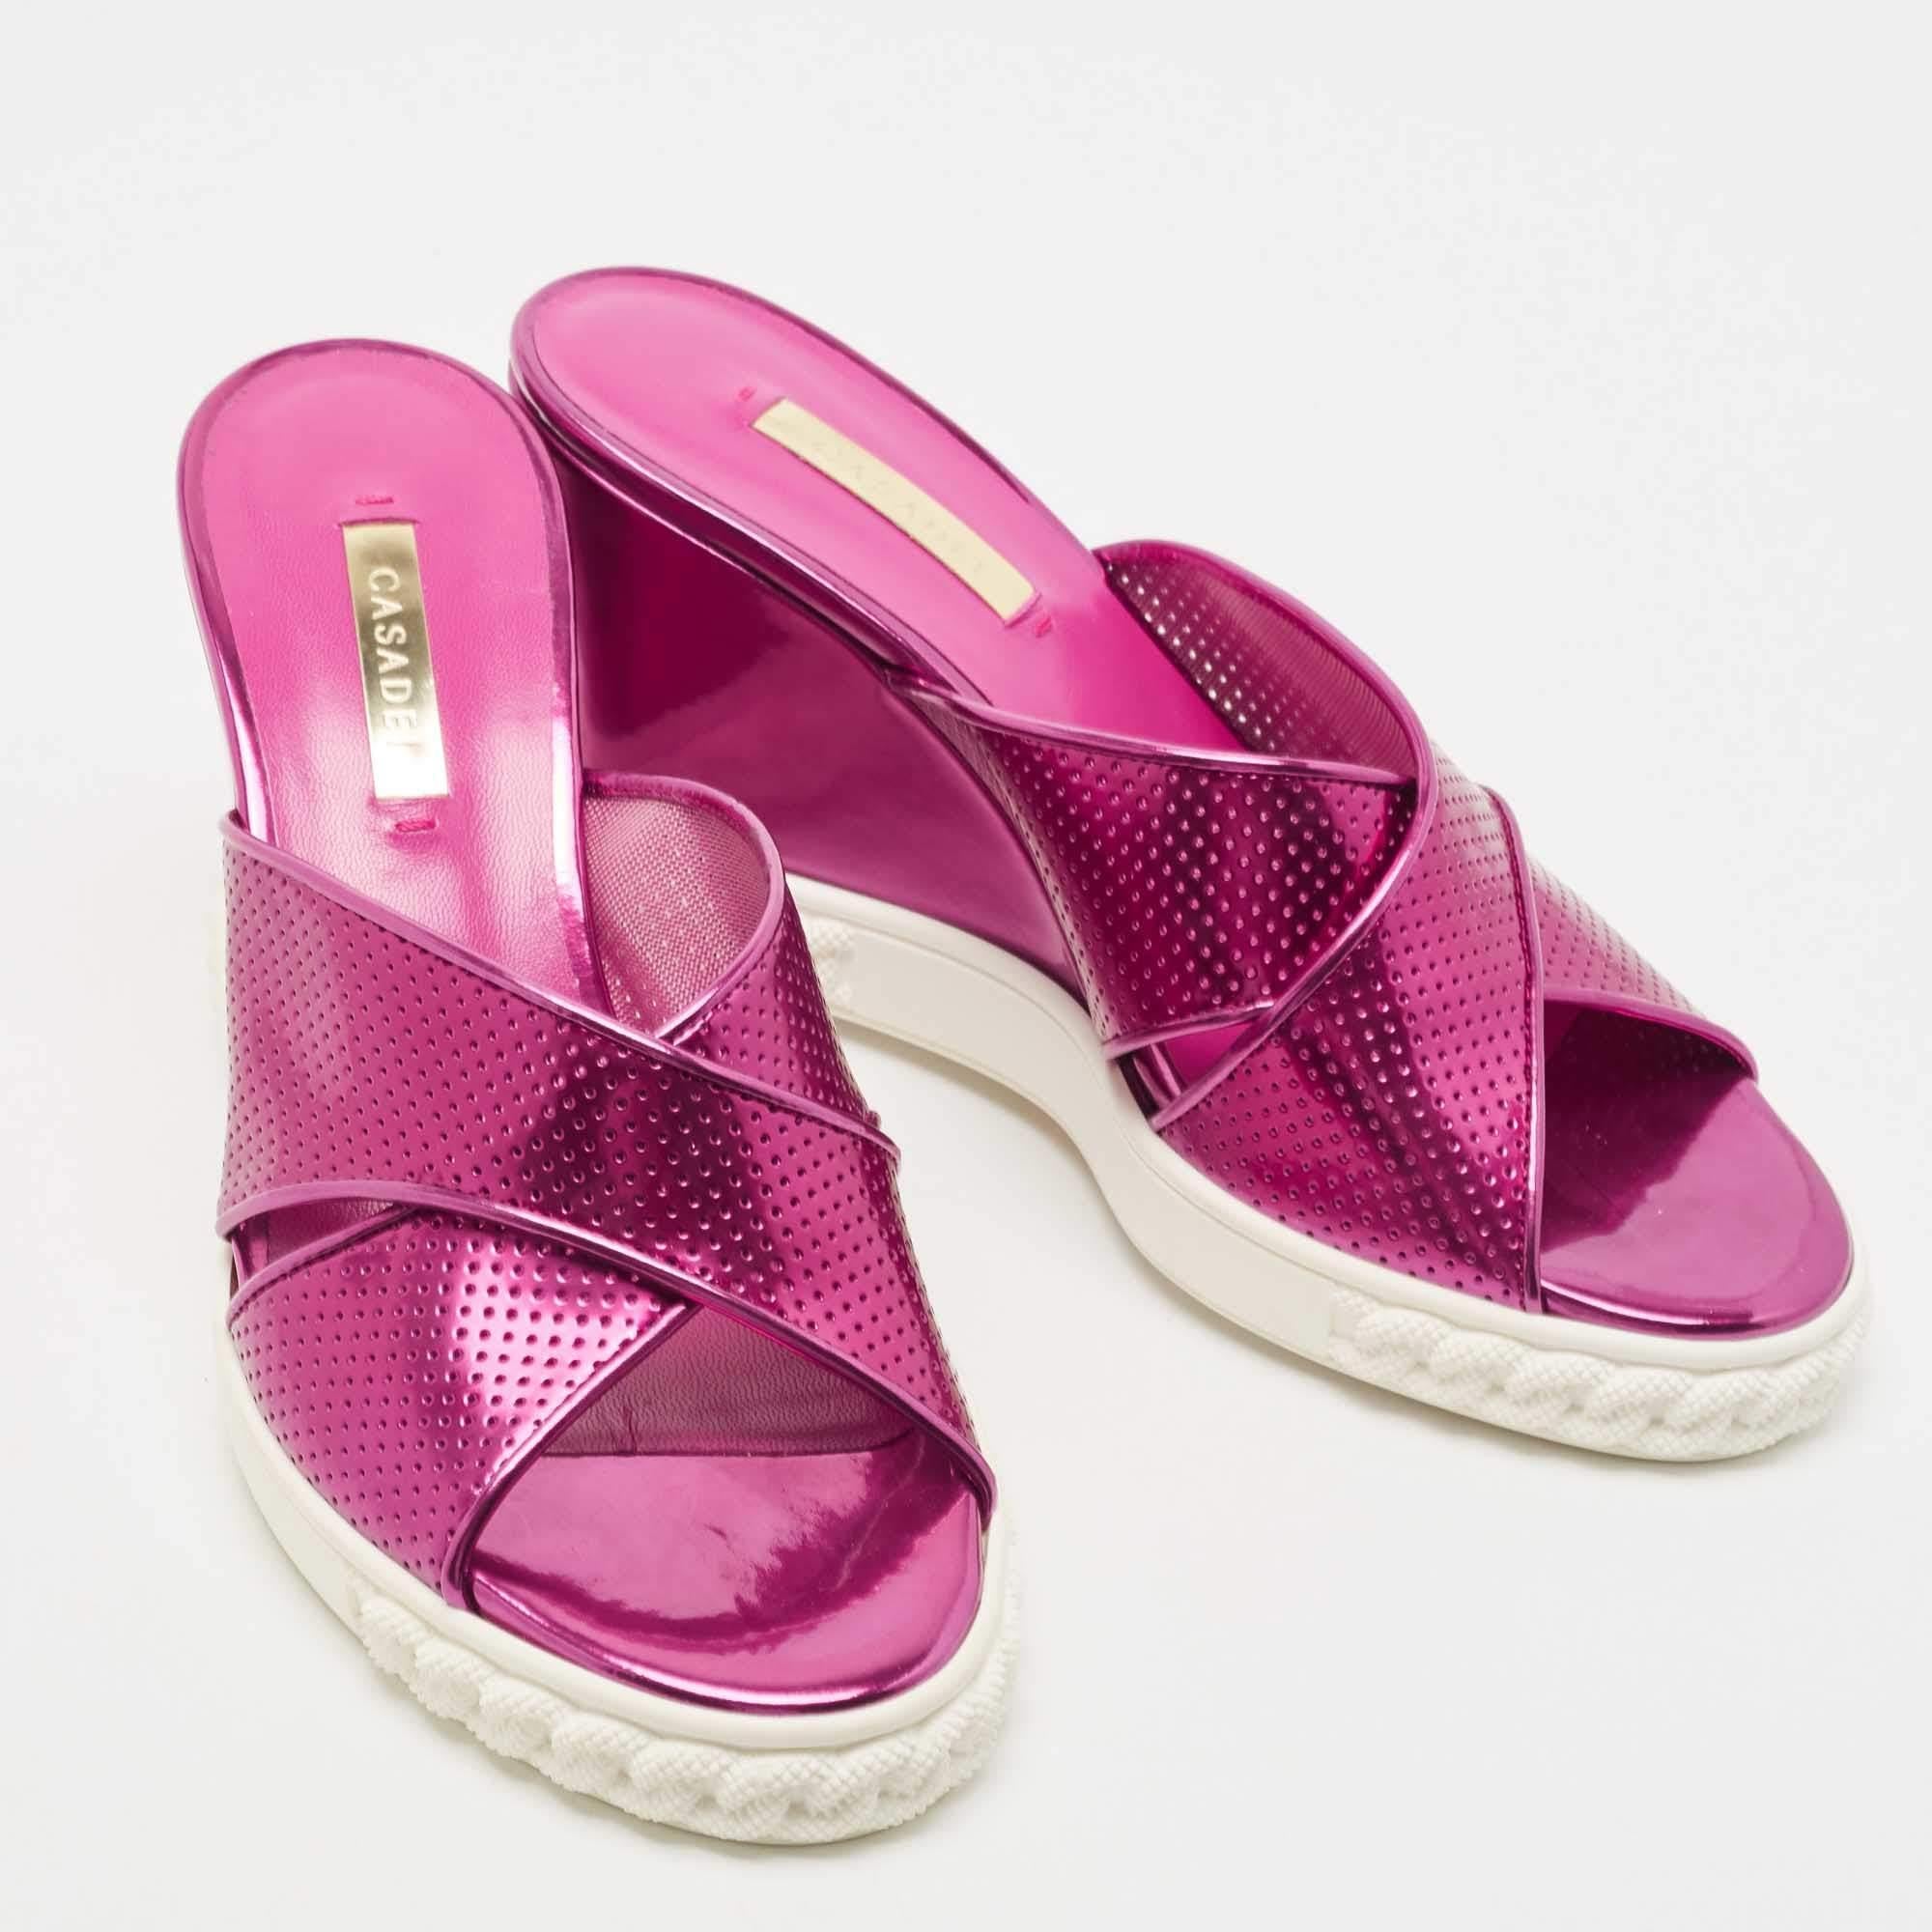 Casadei Pink Perforated Patent Leather Criss Cross Wedge Sandals Size 38 1